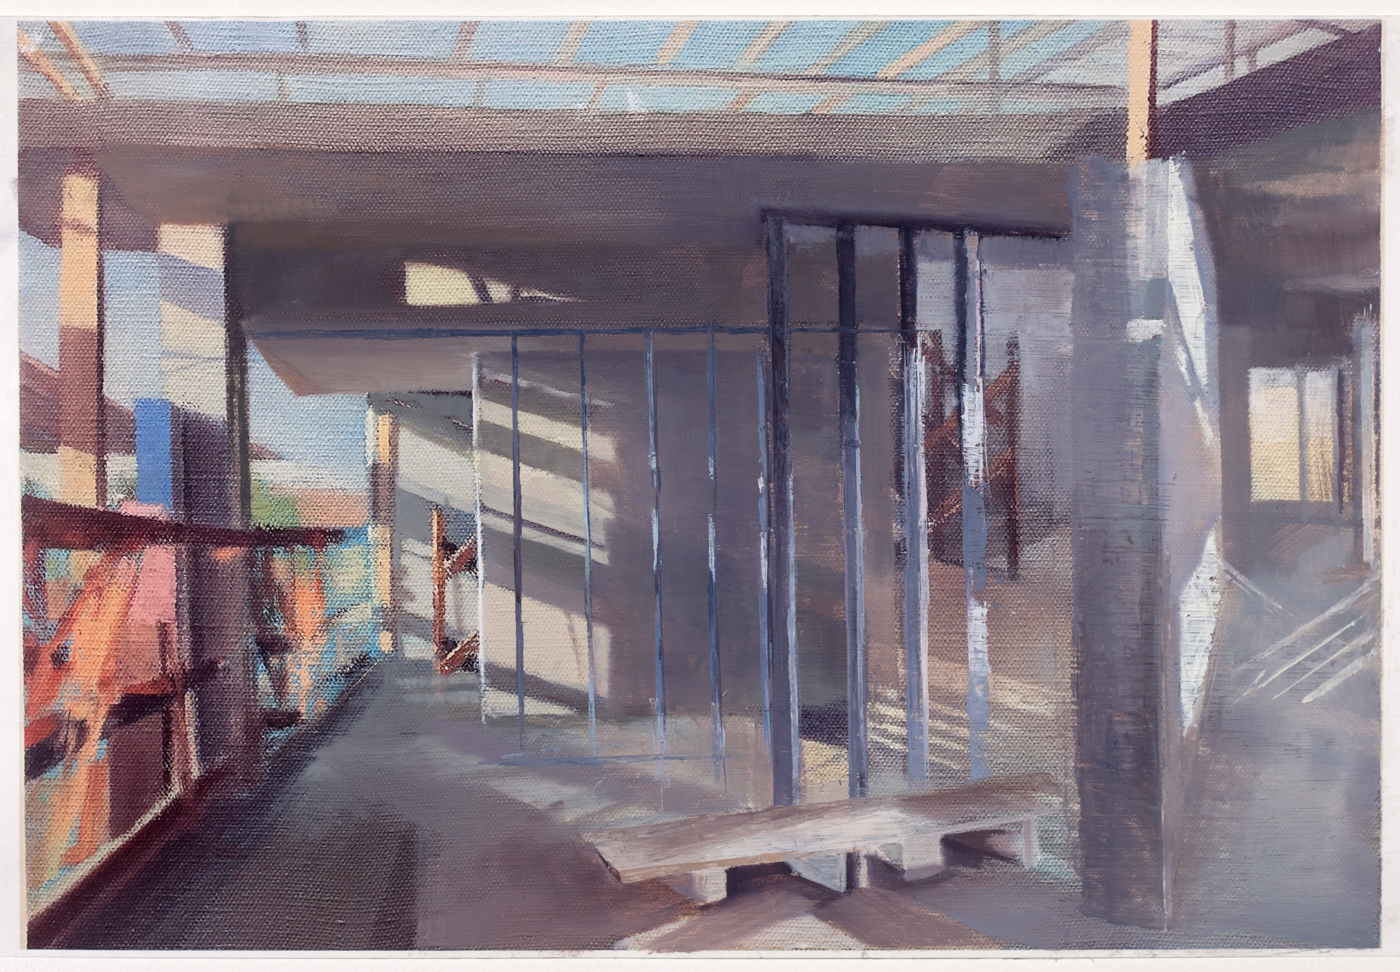   Final Study for 163rd St,  2018   oil on paper, 10 x 18 in 